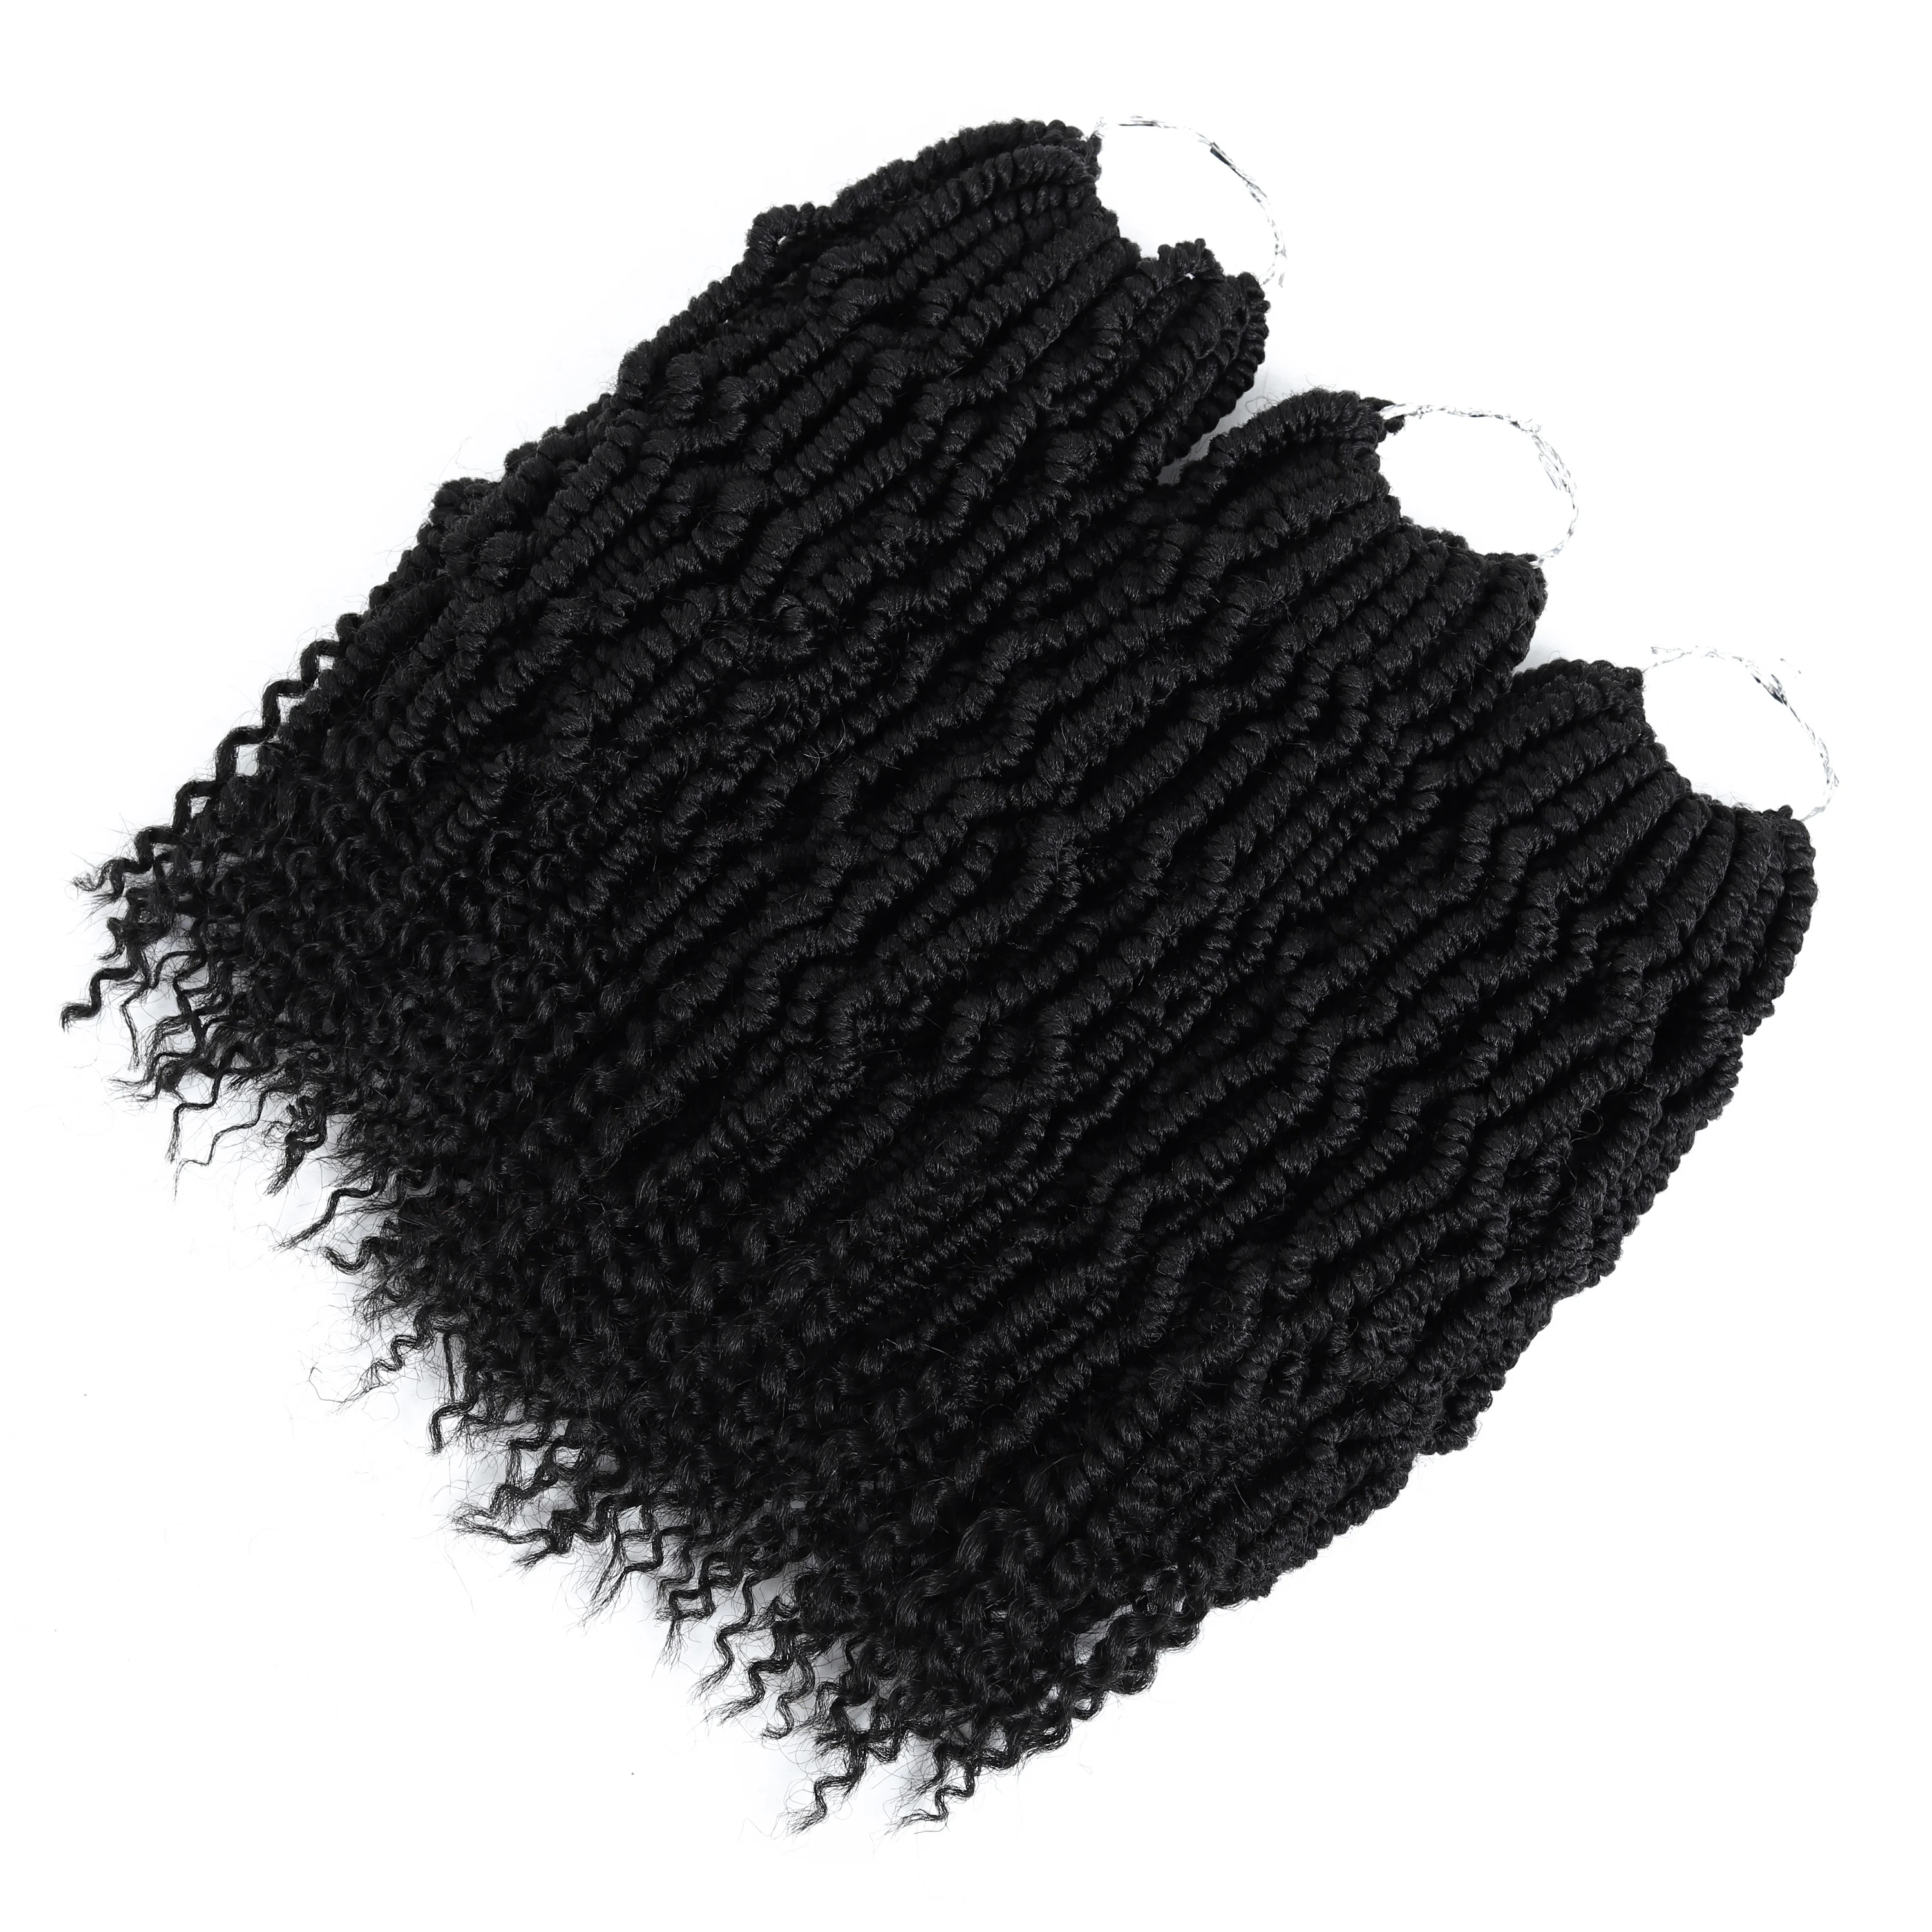 

Cheap Factory Price Synthetic Bomb Pre Twisted Ombre Color Spring Twist Curly Passion Twist Hair Crochet Braid Hair Extensions